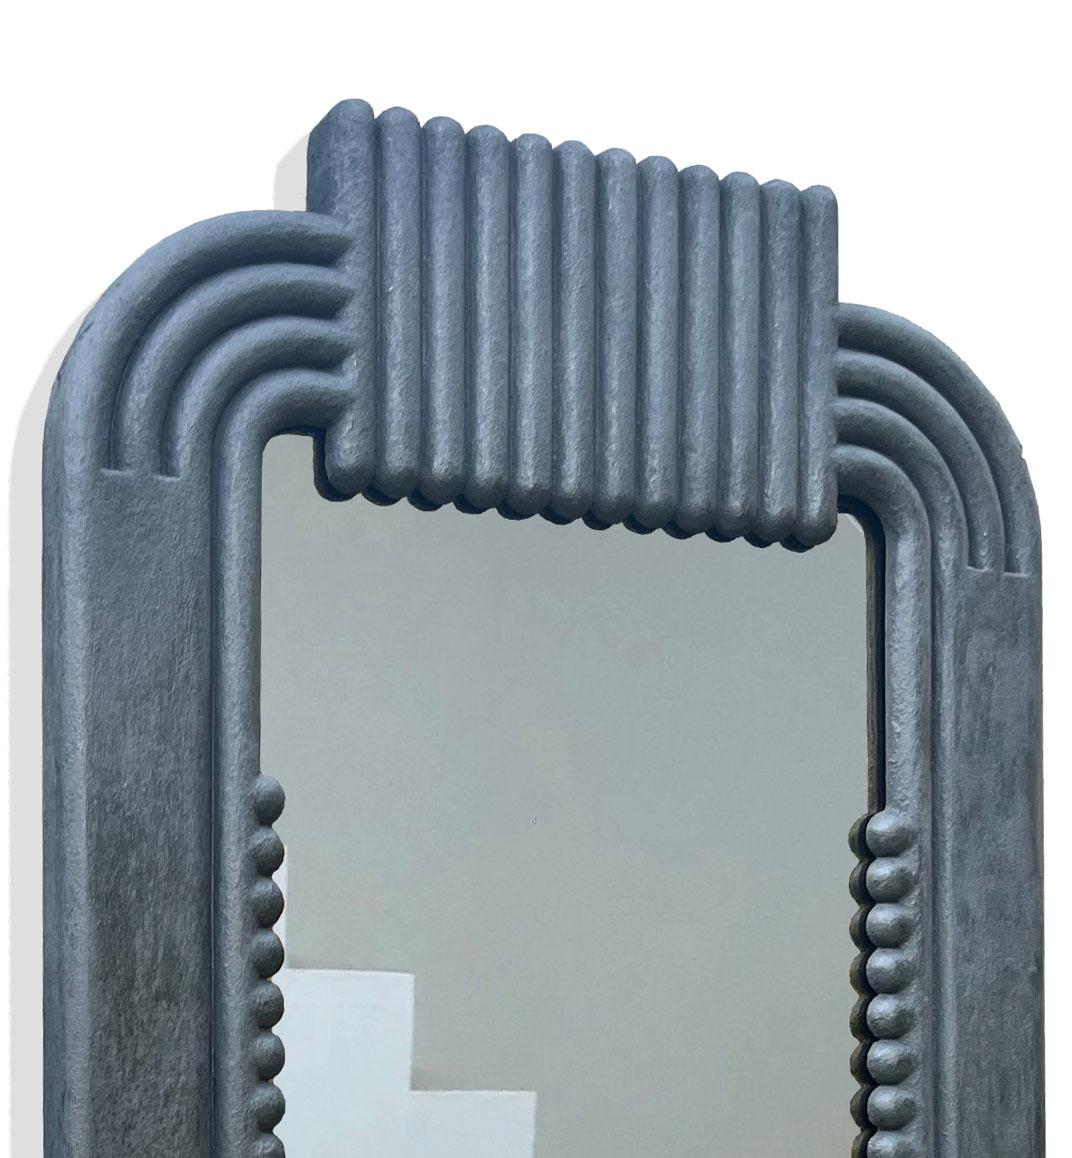 This minimalist hand-cast reinforced gypsum mirror is a top-quality Ian C.R. Martin Studio piece. It features a striking, concentric design using a backcasting method that integrates the mirror seamlessly into its plaster frame.  The plaster is